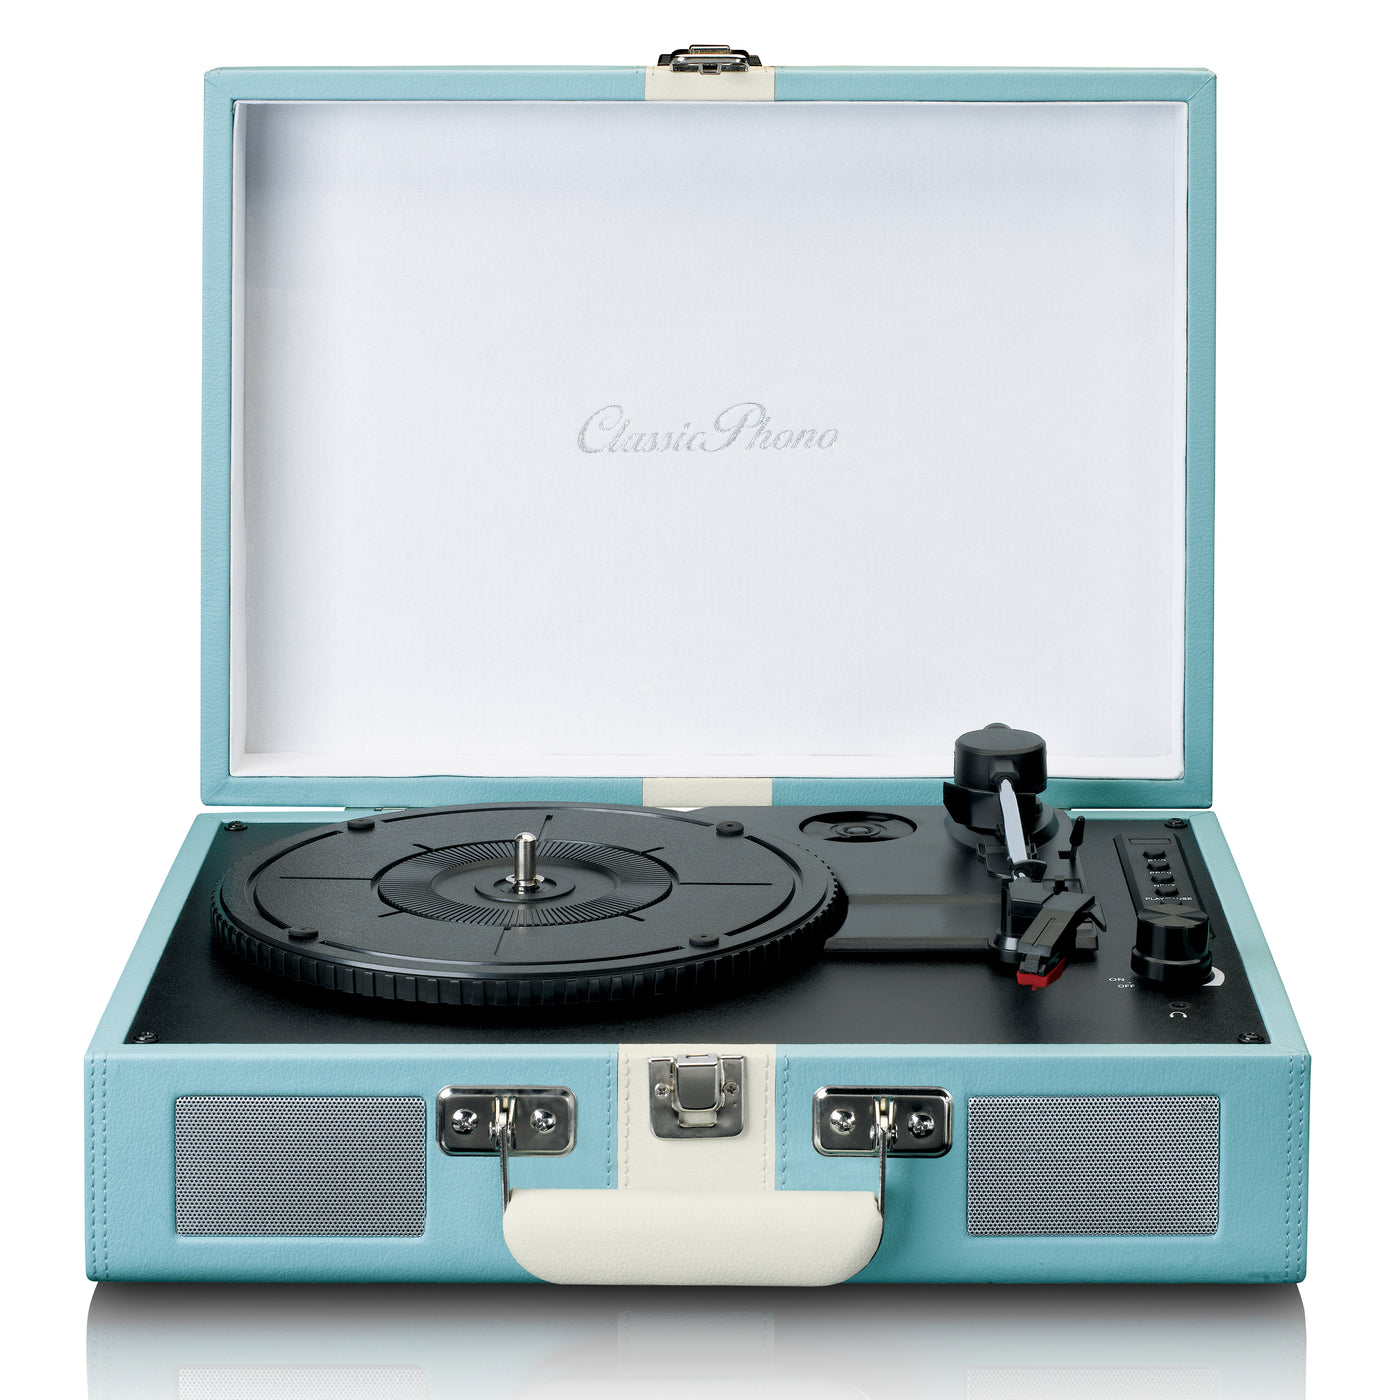 CLASSIC PHONO TT-110BUWH - Record Player with Bluetooth® reception and built in speakers - Blue White